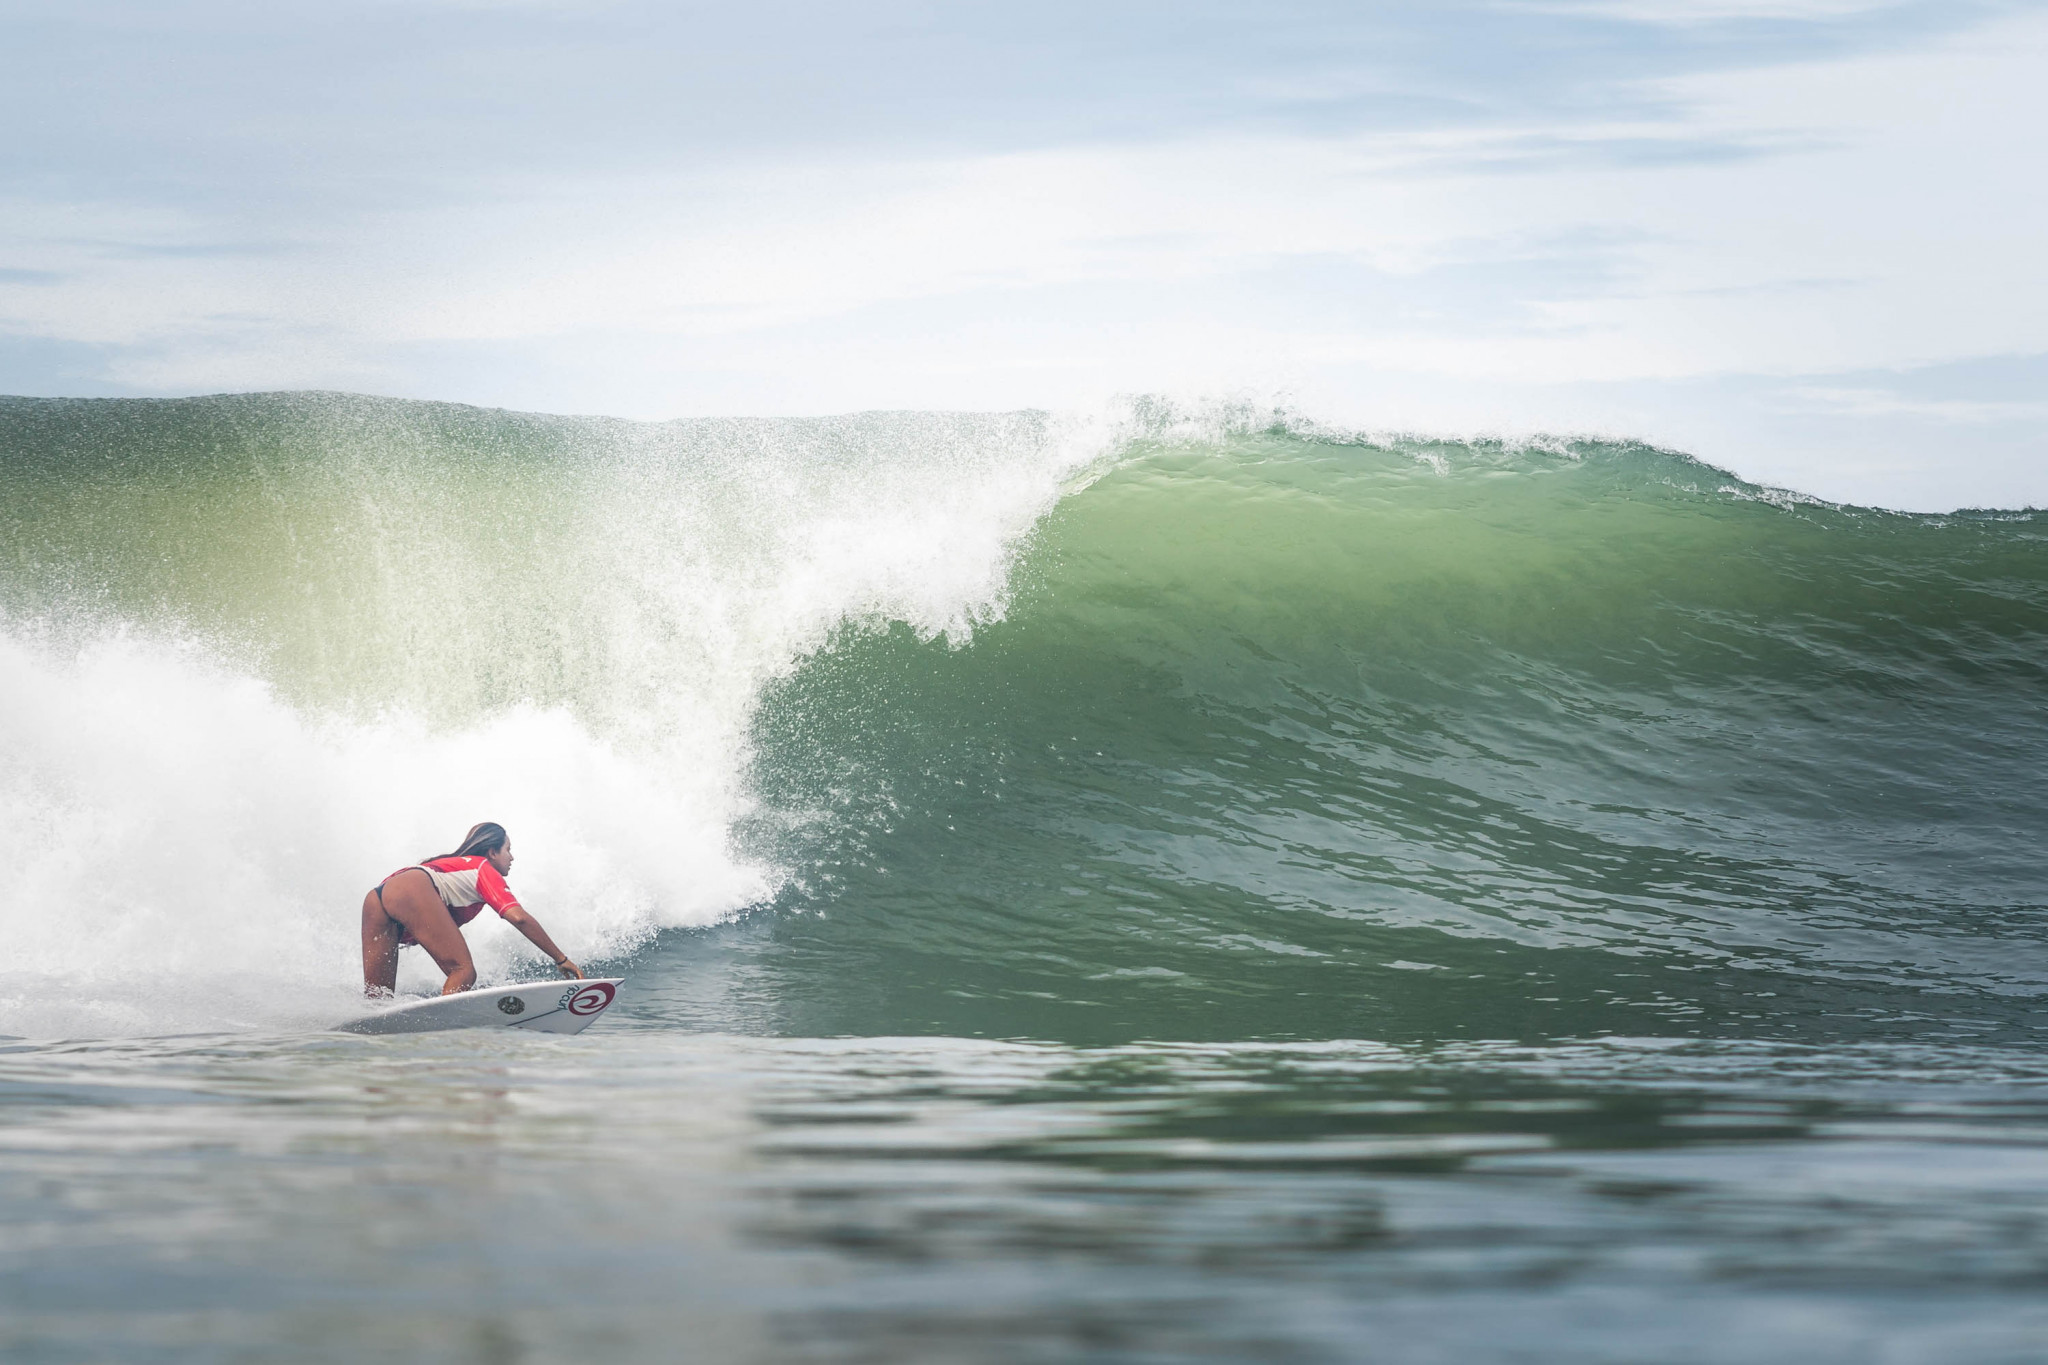 Strong waves are expected in El Salvador for the week-long event ©ISA/Sean Evans